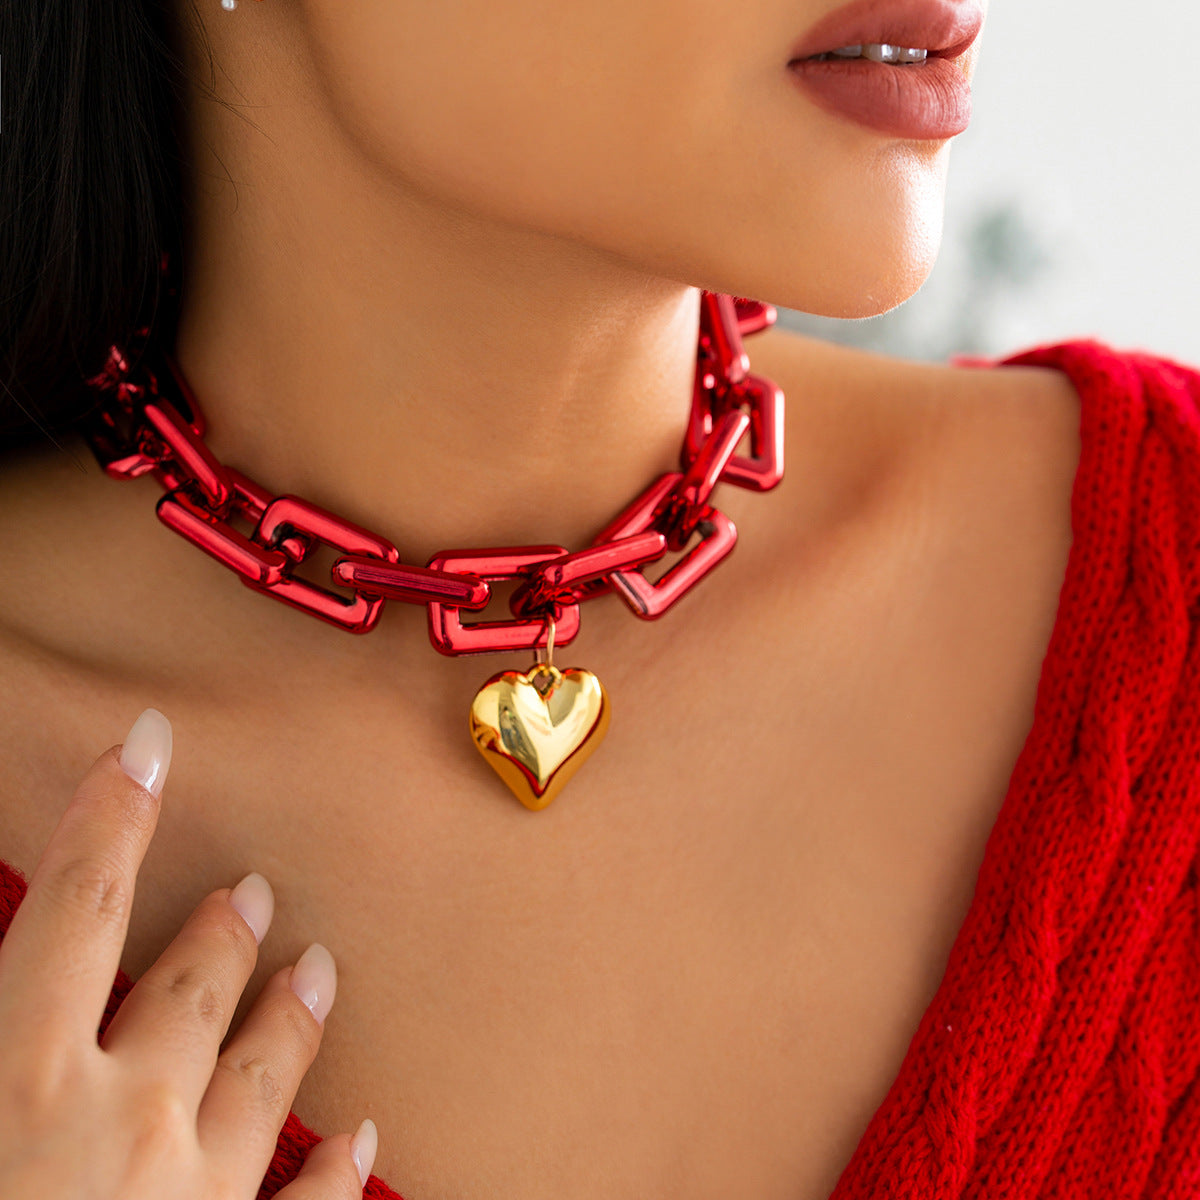 Neon Pink Chunky Link Chain Choker resin Necklace for party girls - CIVIBUY